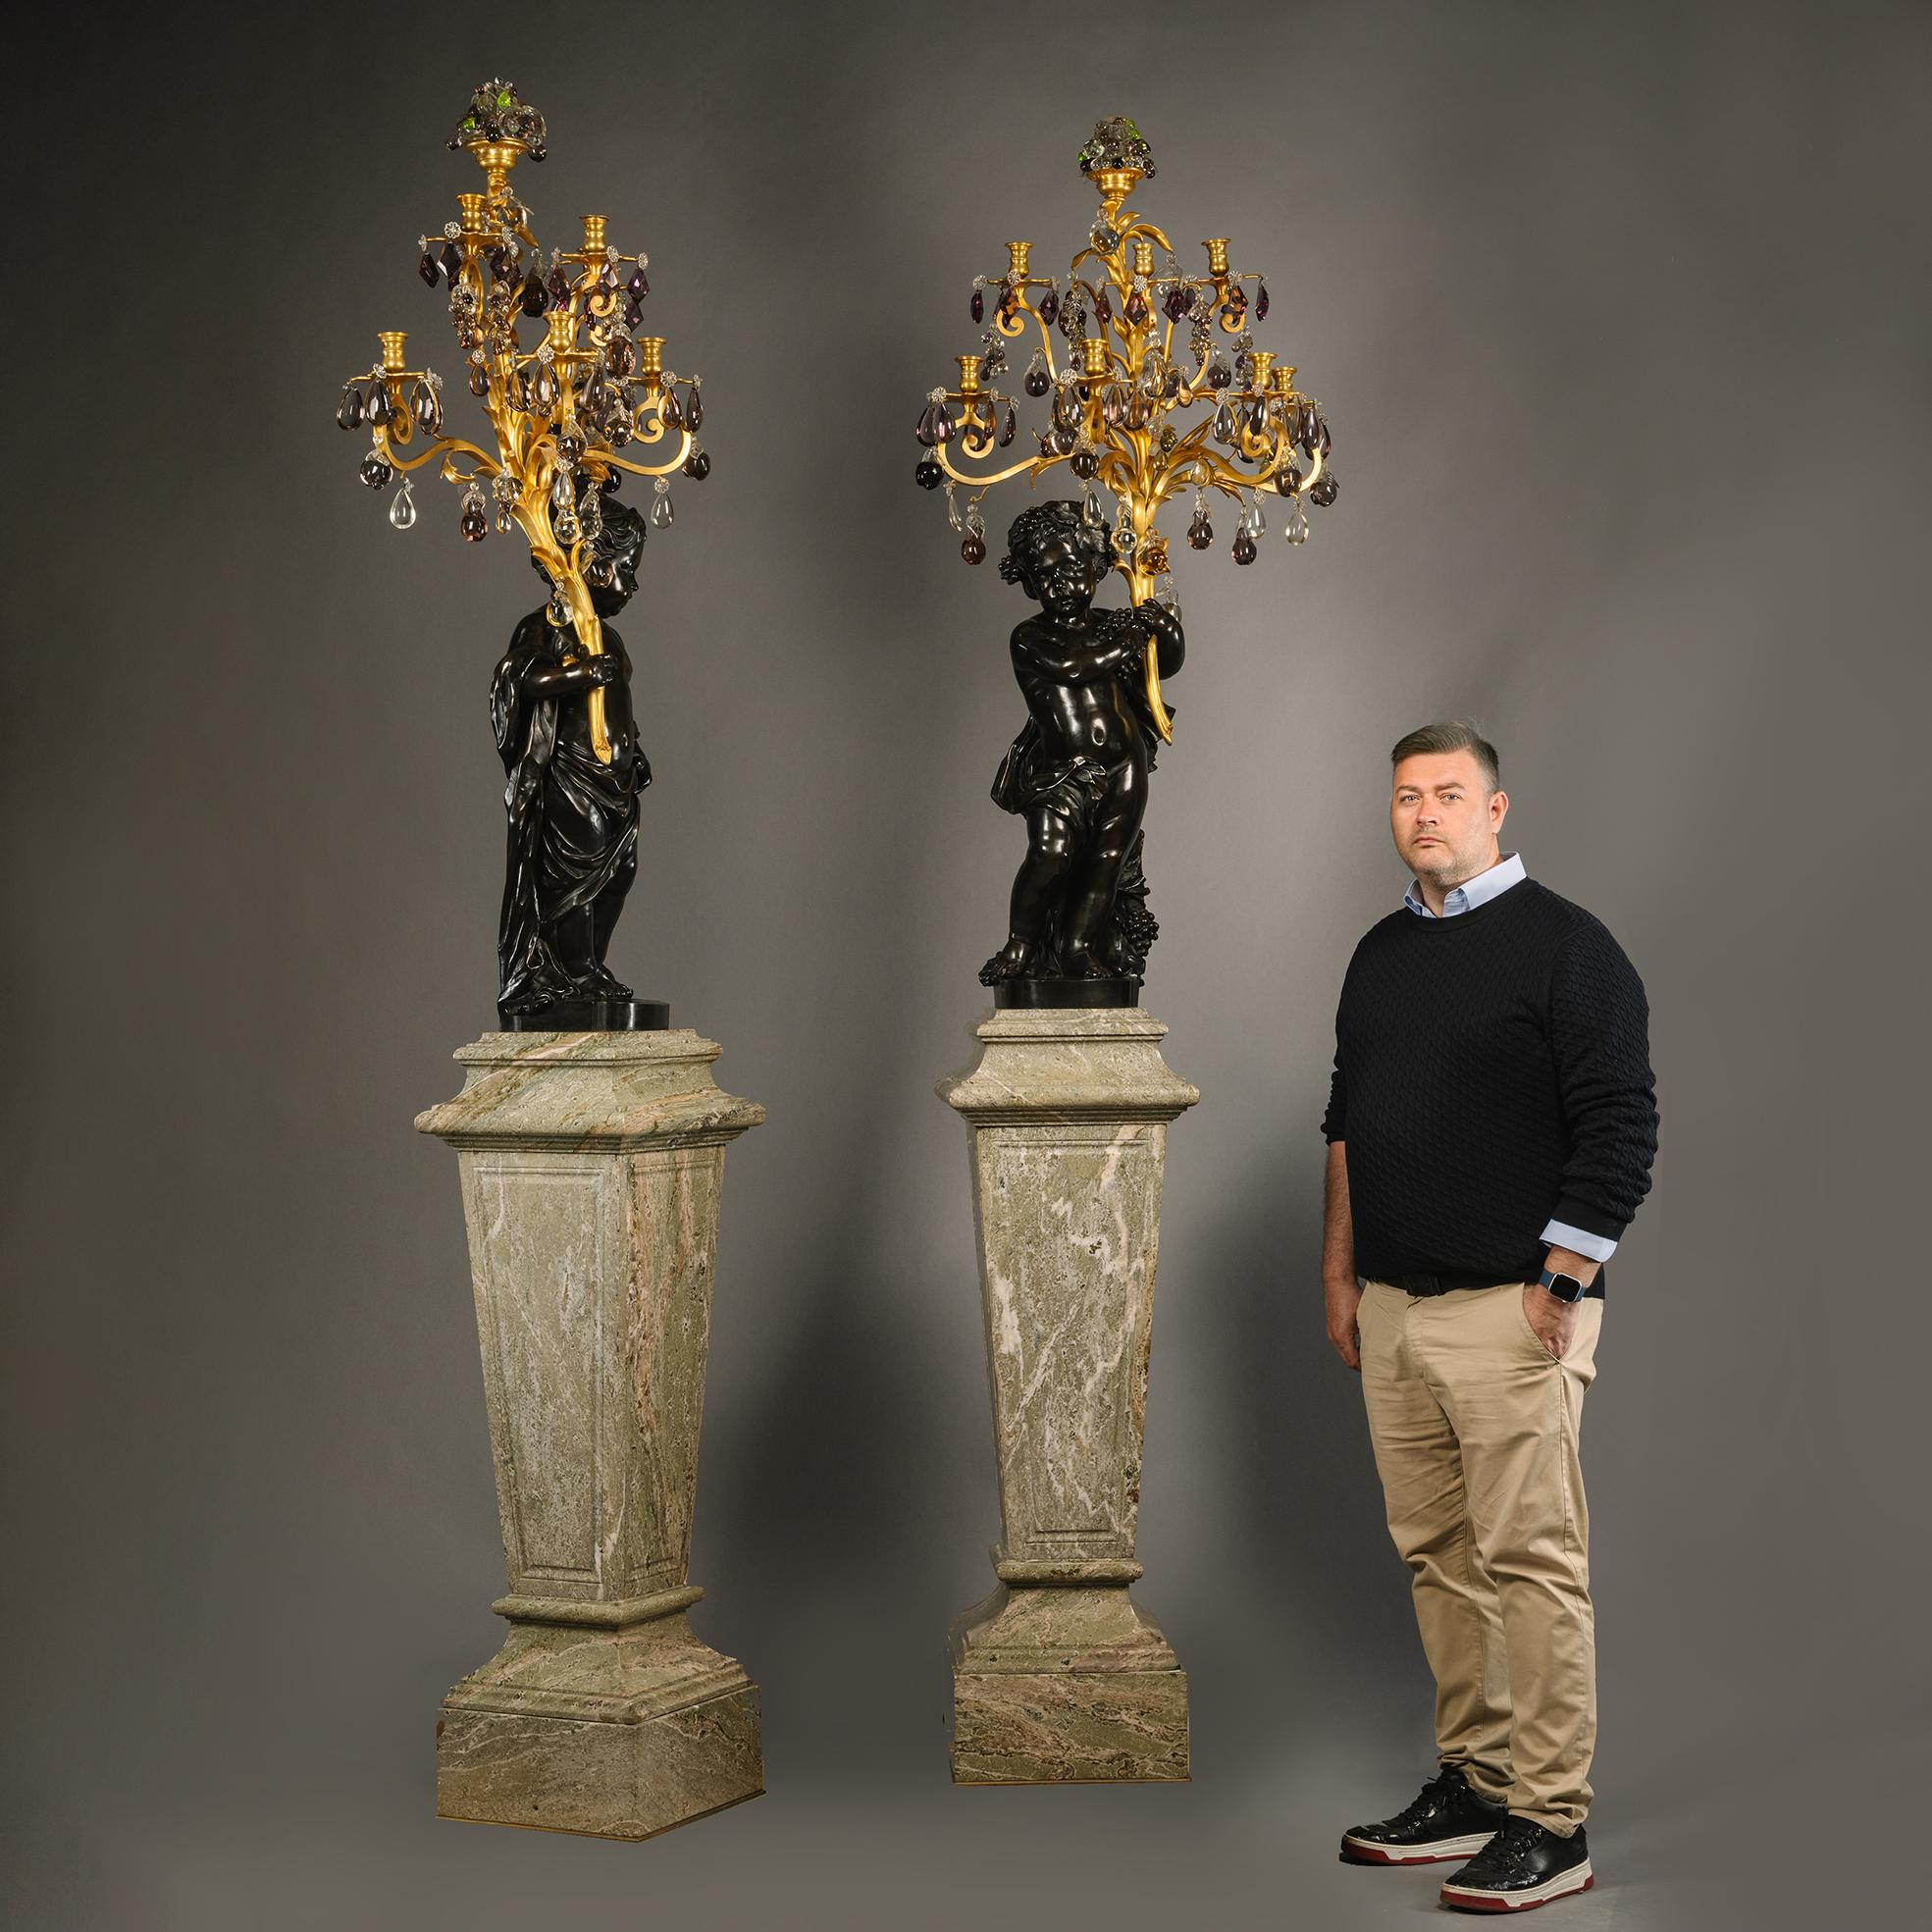 A Pair of Magnificent and Palatial Patinated Bronze Figural Putto Seven-Light Gilt-Bronze, Rock-Crystal and Amethyst Glass Candelabra, On Green Marble Pedestals. 

By Raingo Frères, Paris. 

Incised 'RF' marks for Raingo Frères. 

These magnificent